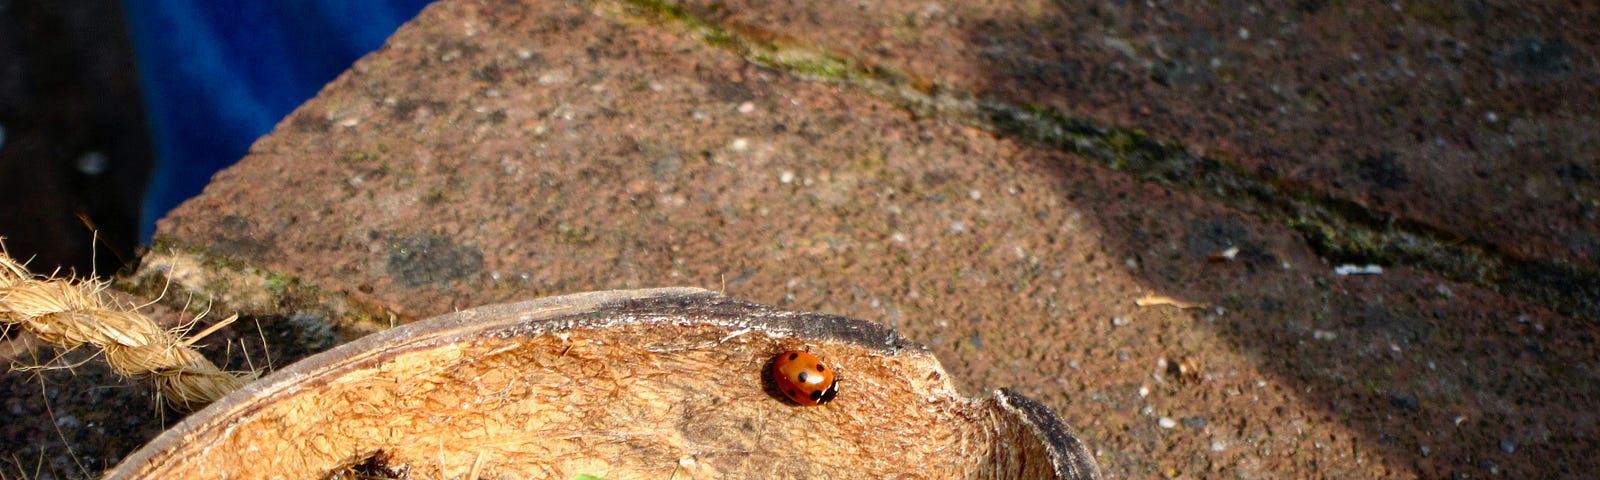 A leaf and a ladybird in an empty plant pot holder on a wall